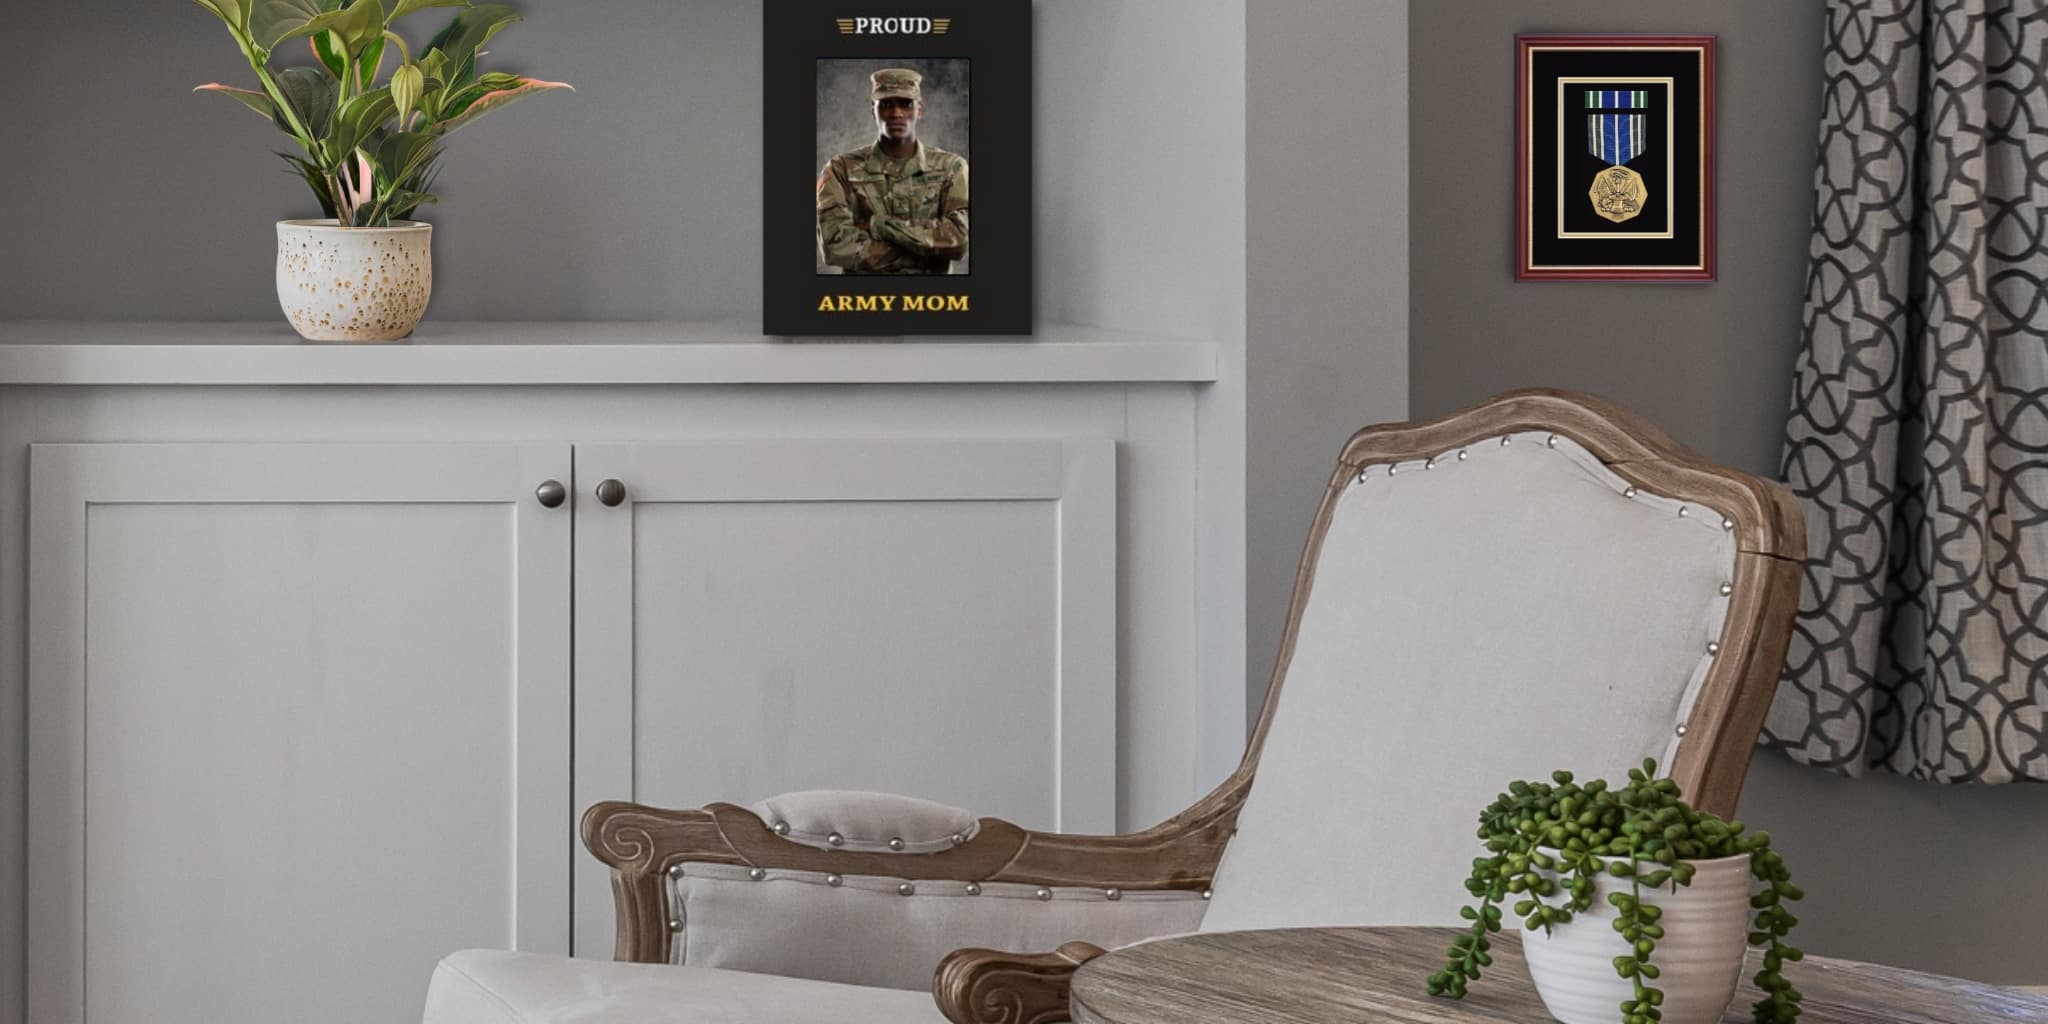 army mom photo frame and medal frame in living room